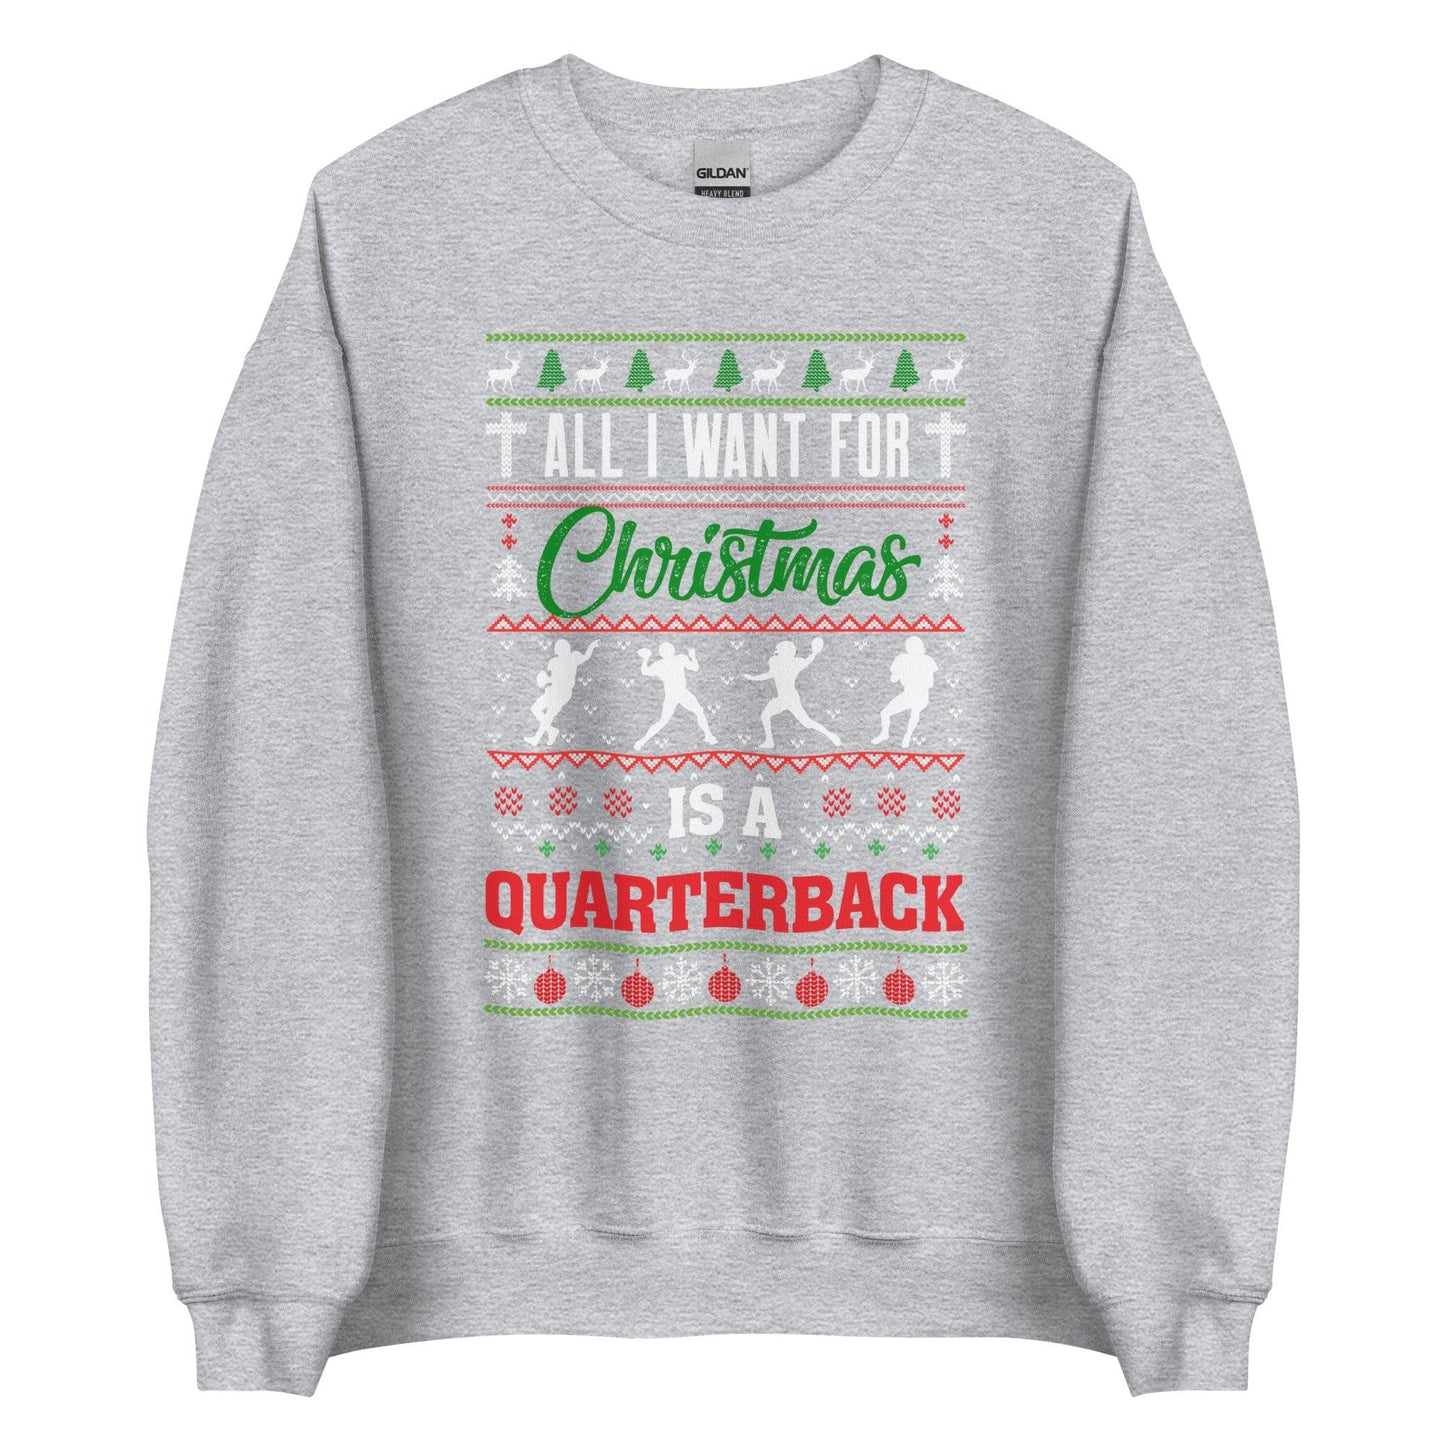 Ugly Holiday Sweaters “No Quarterback” - Fan Arch